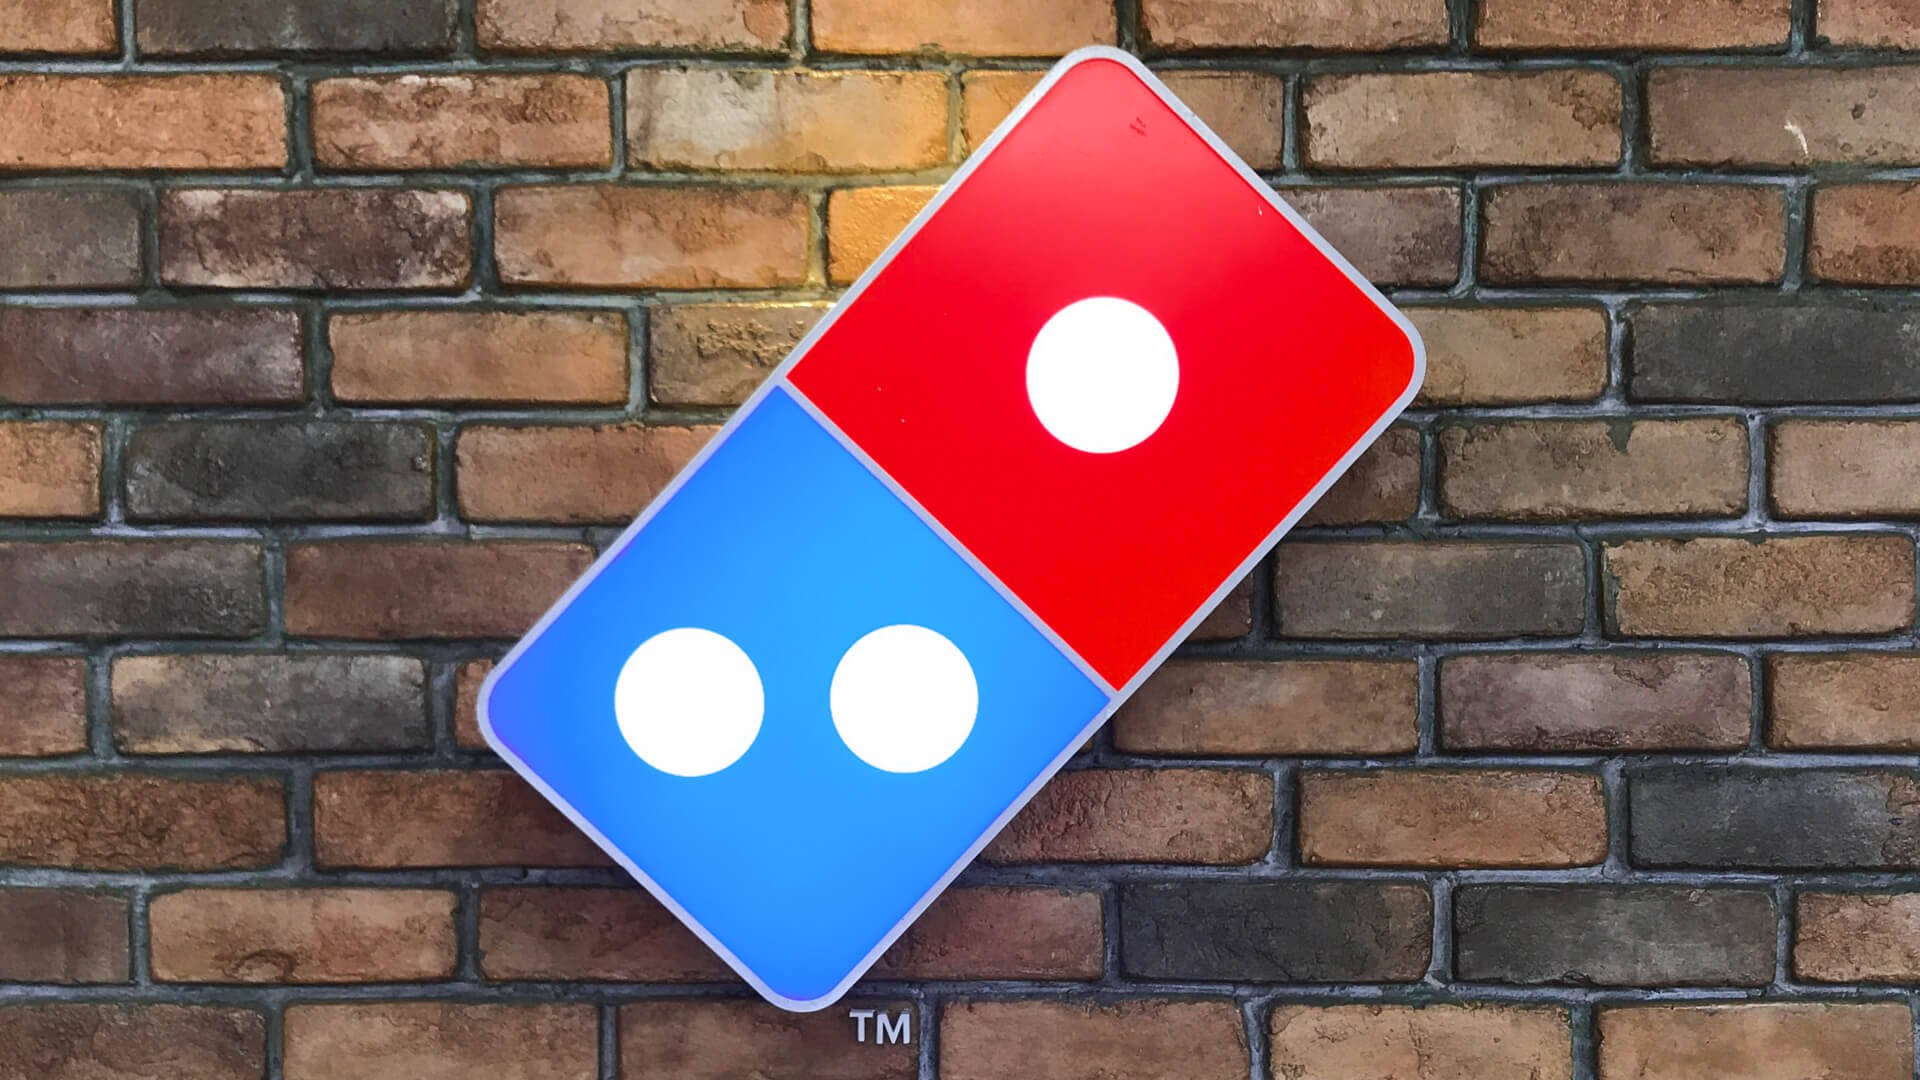 Top 999+ Dominos Pizza Wallpaper Full HD, 4K✅Free to Use